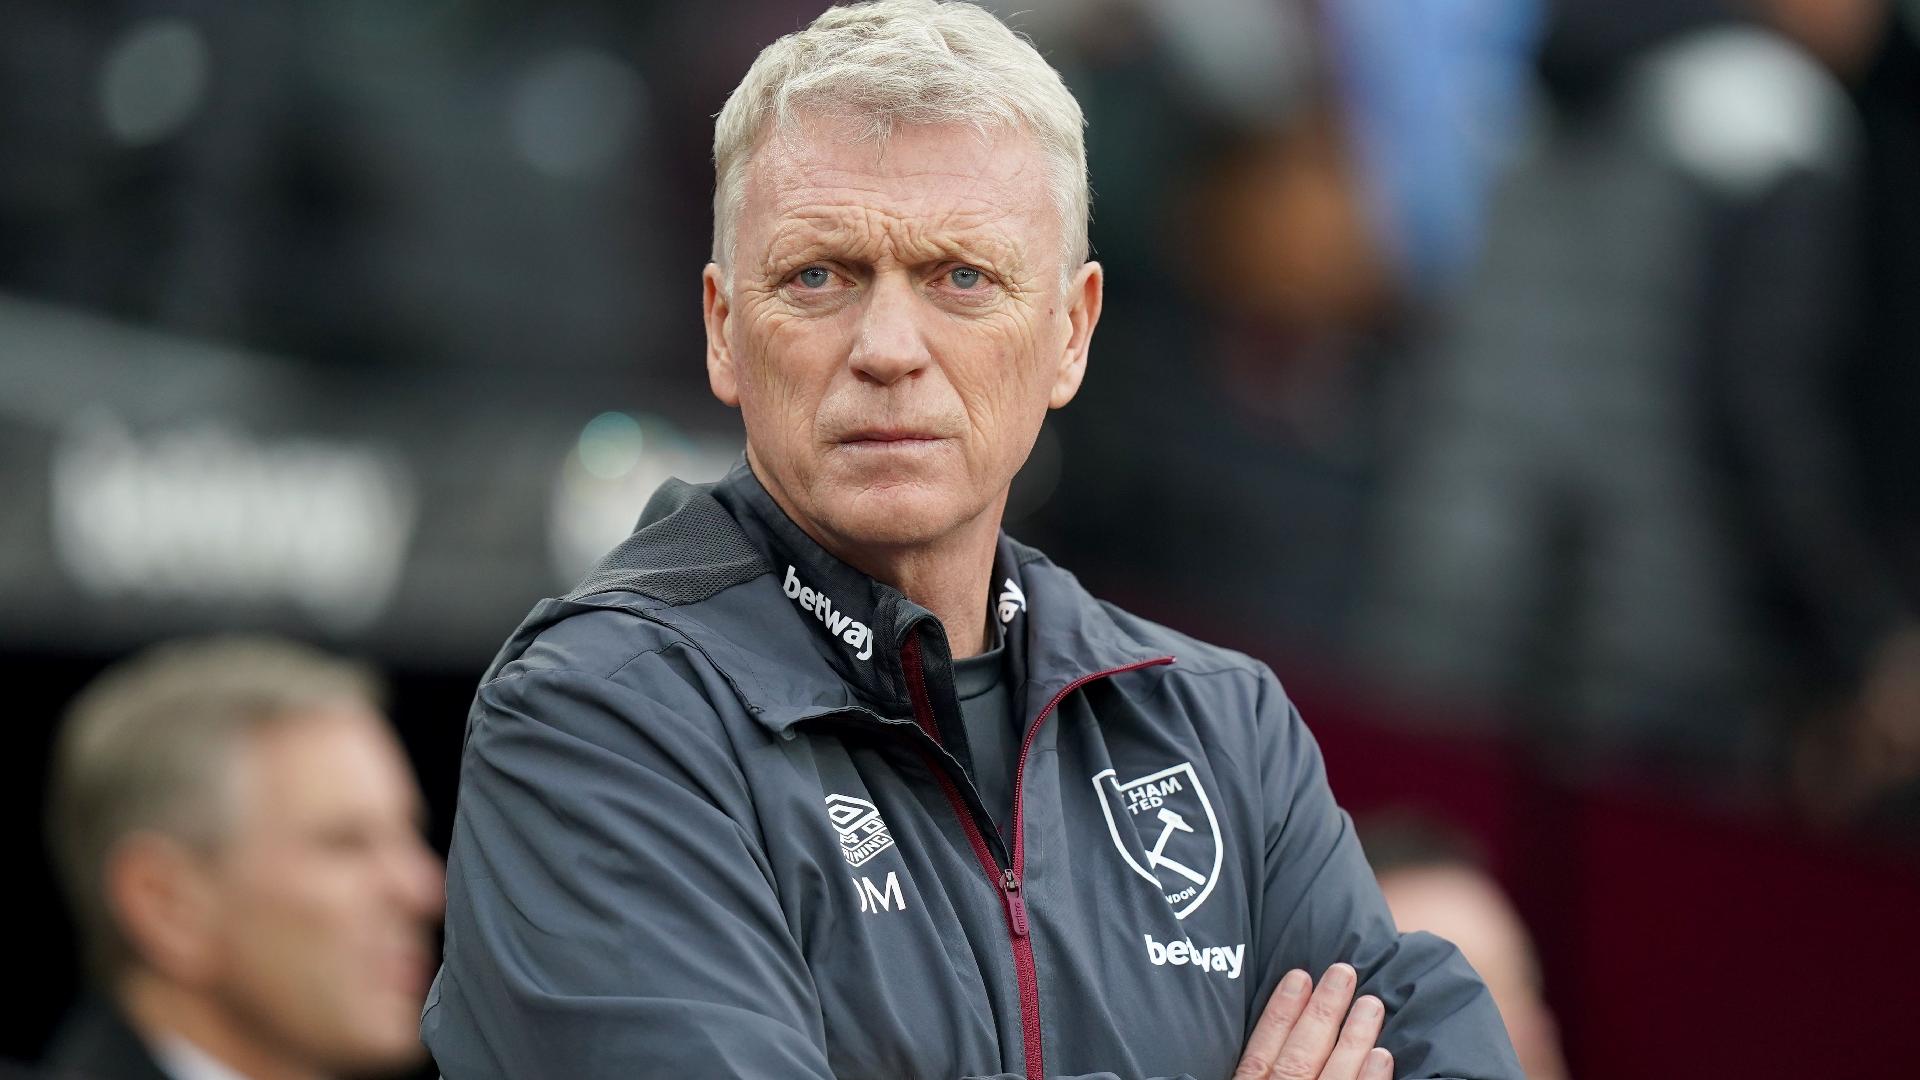 David Moyes is Leaving West Ham by Mutual Consent